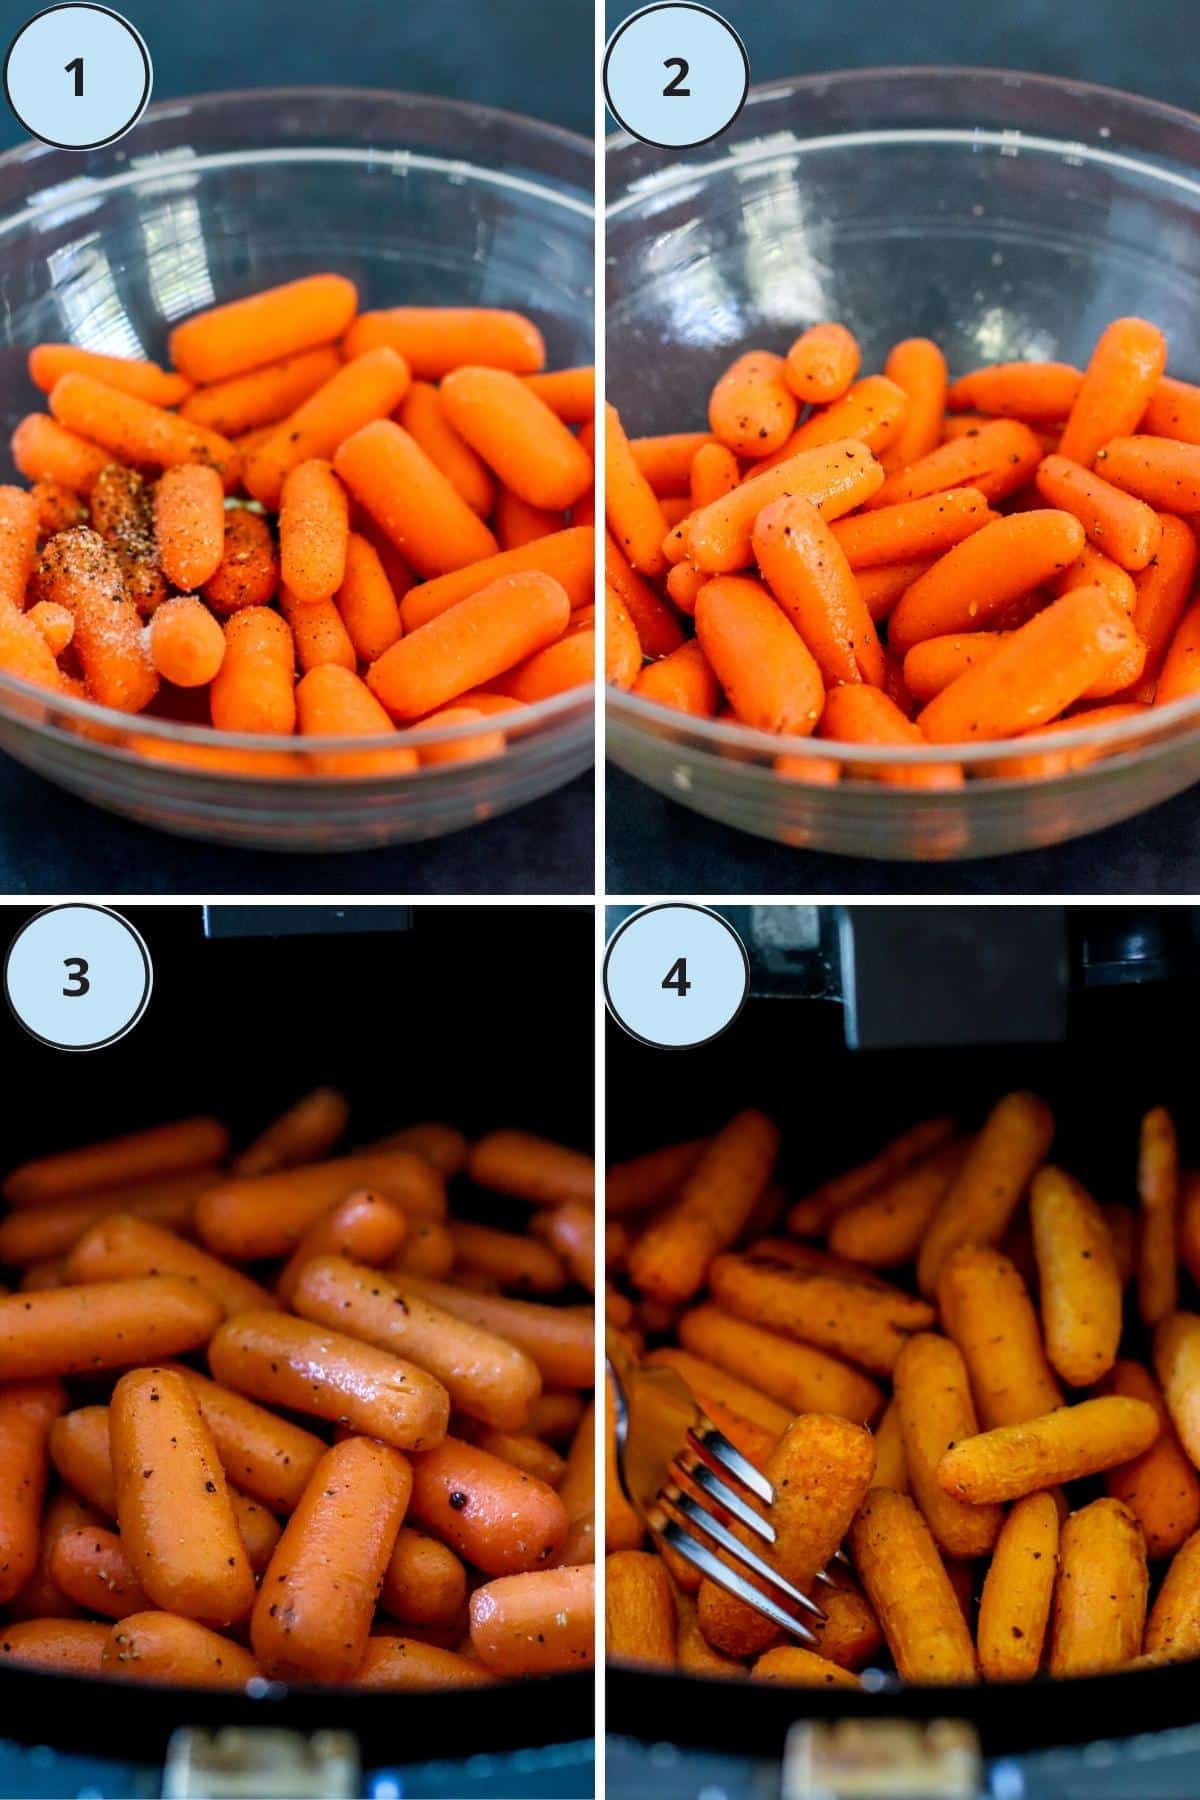 Numbered steps for making this recipe: 1, a mixing bowl with the carrots, olive oil, salt and pepper, 2, the ingredients tossed together, 3, the carrots in an air fryer basket, and 4, the finished carrots.